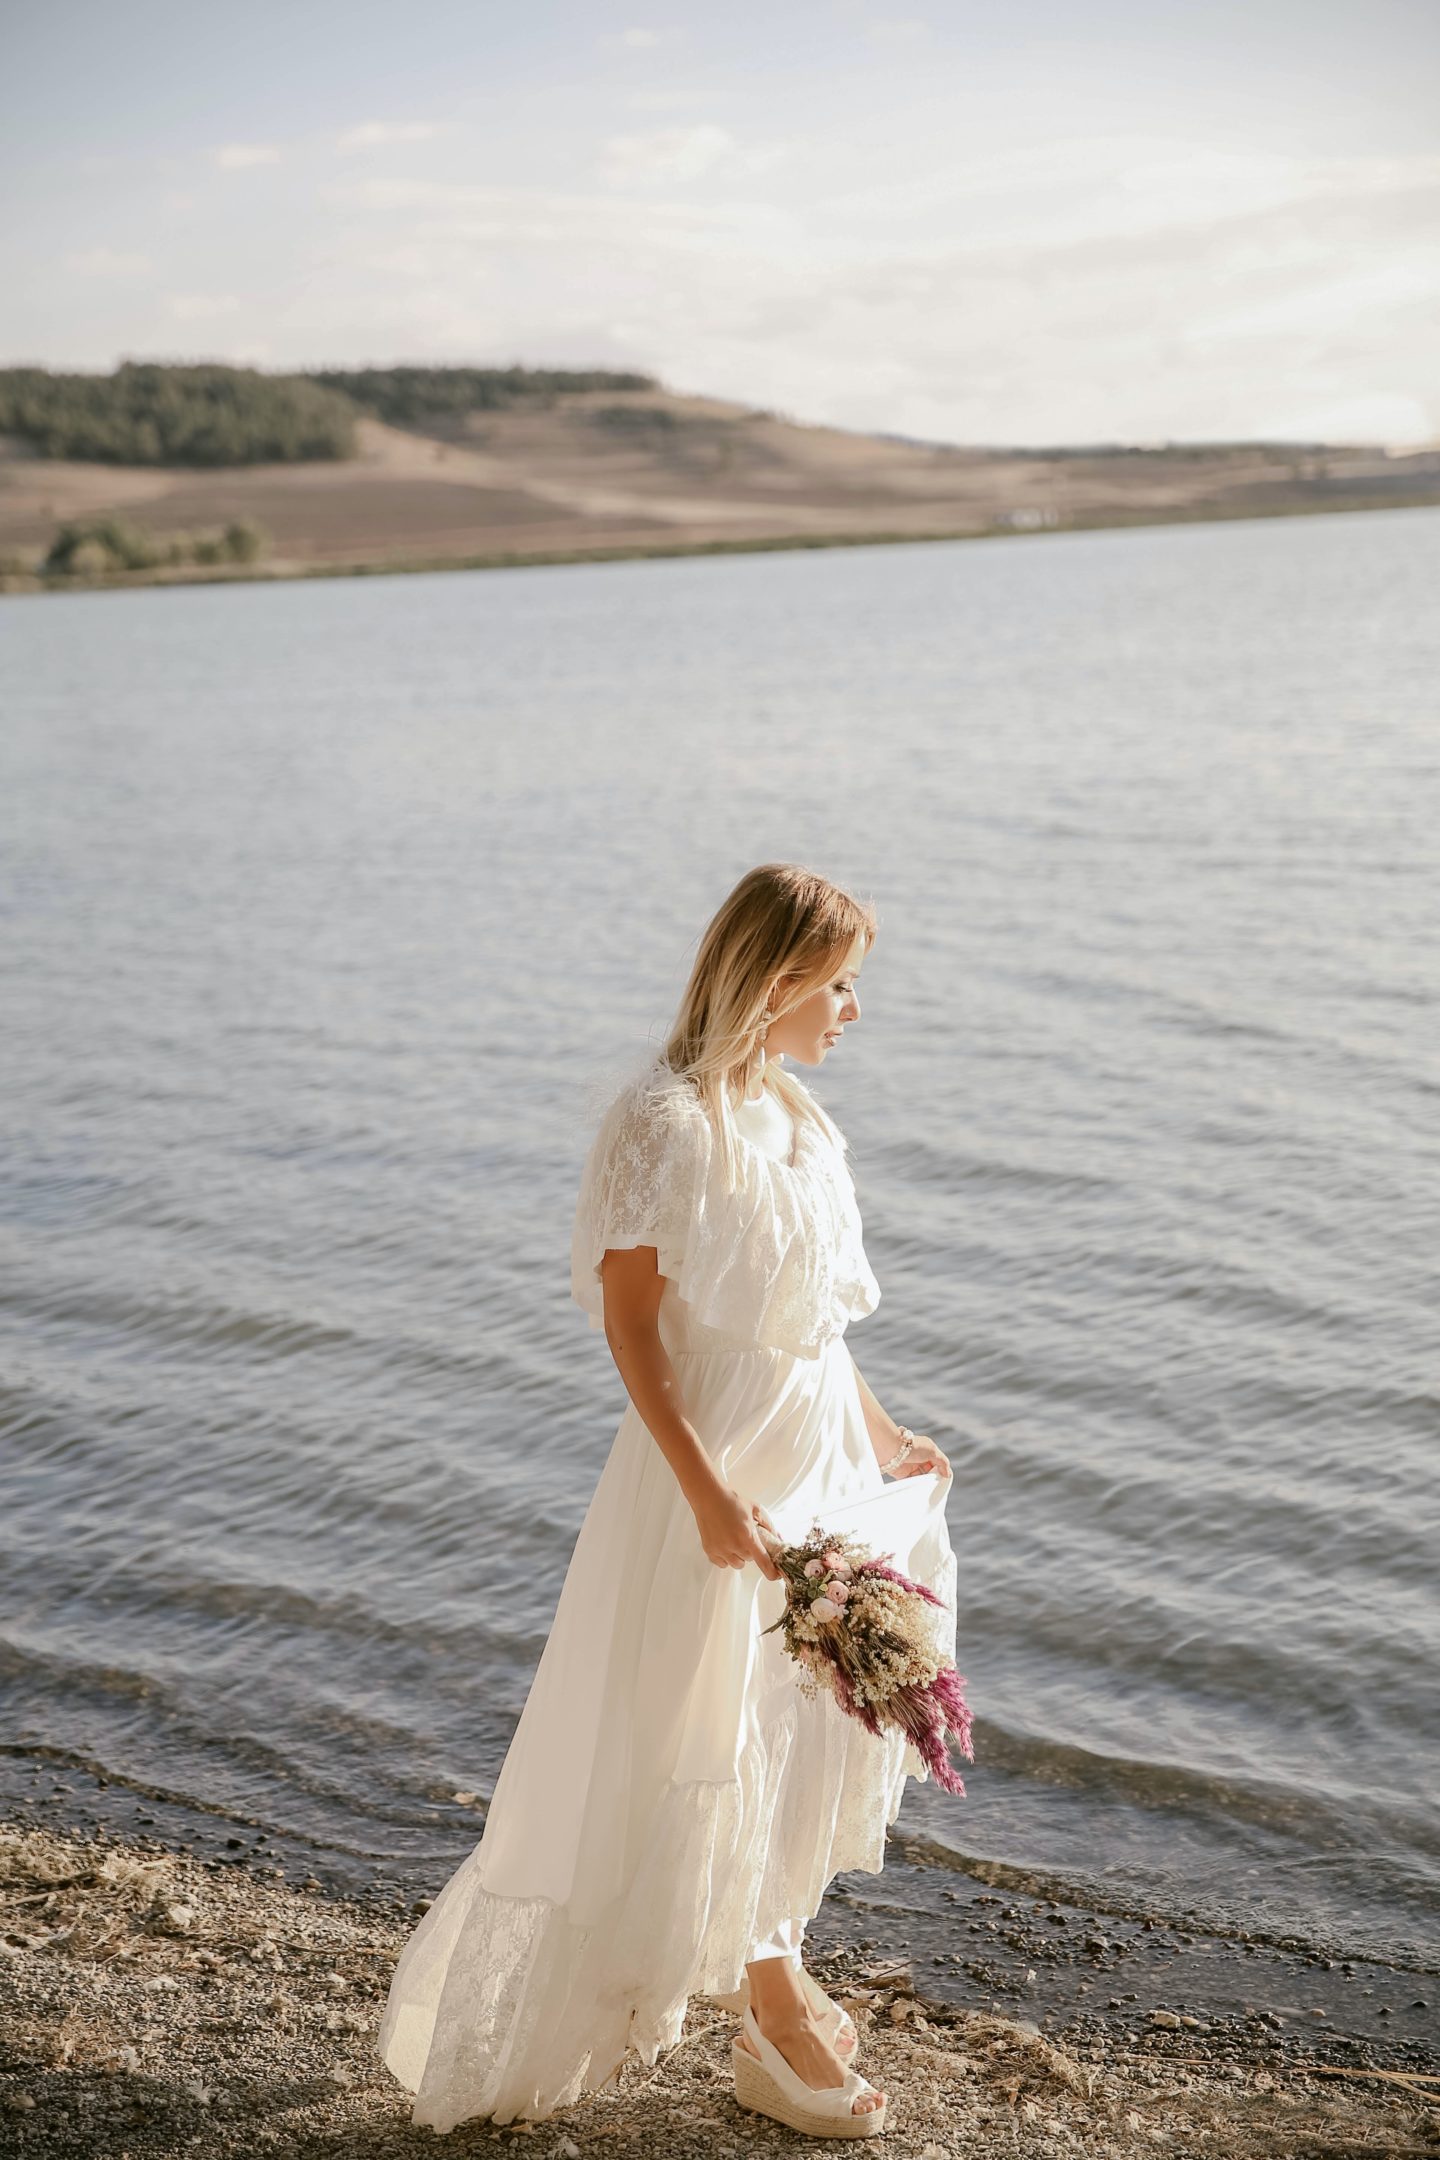  5 Places To Buy Pre-Loved and Vintage Wedding Dresses